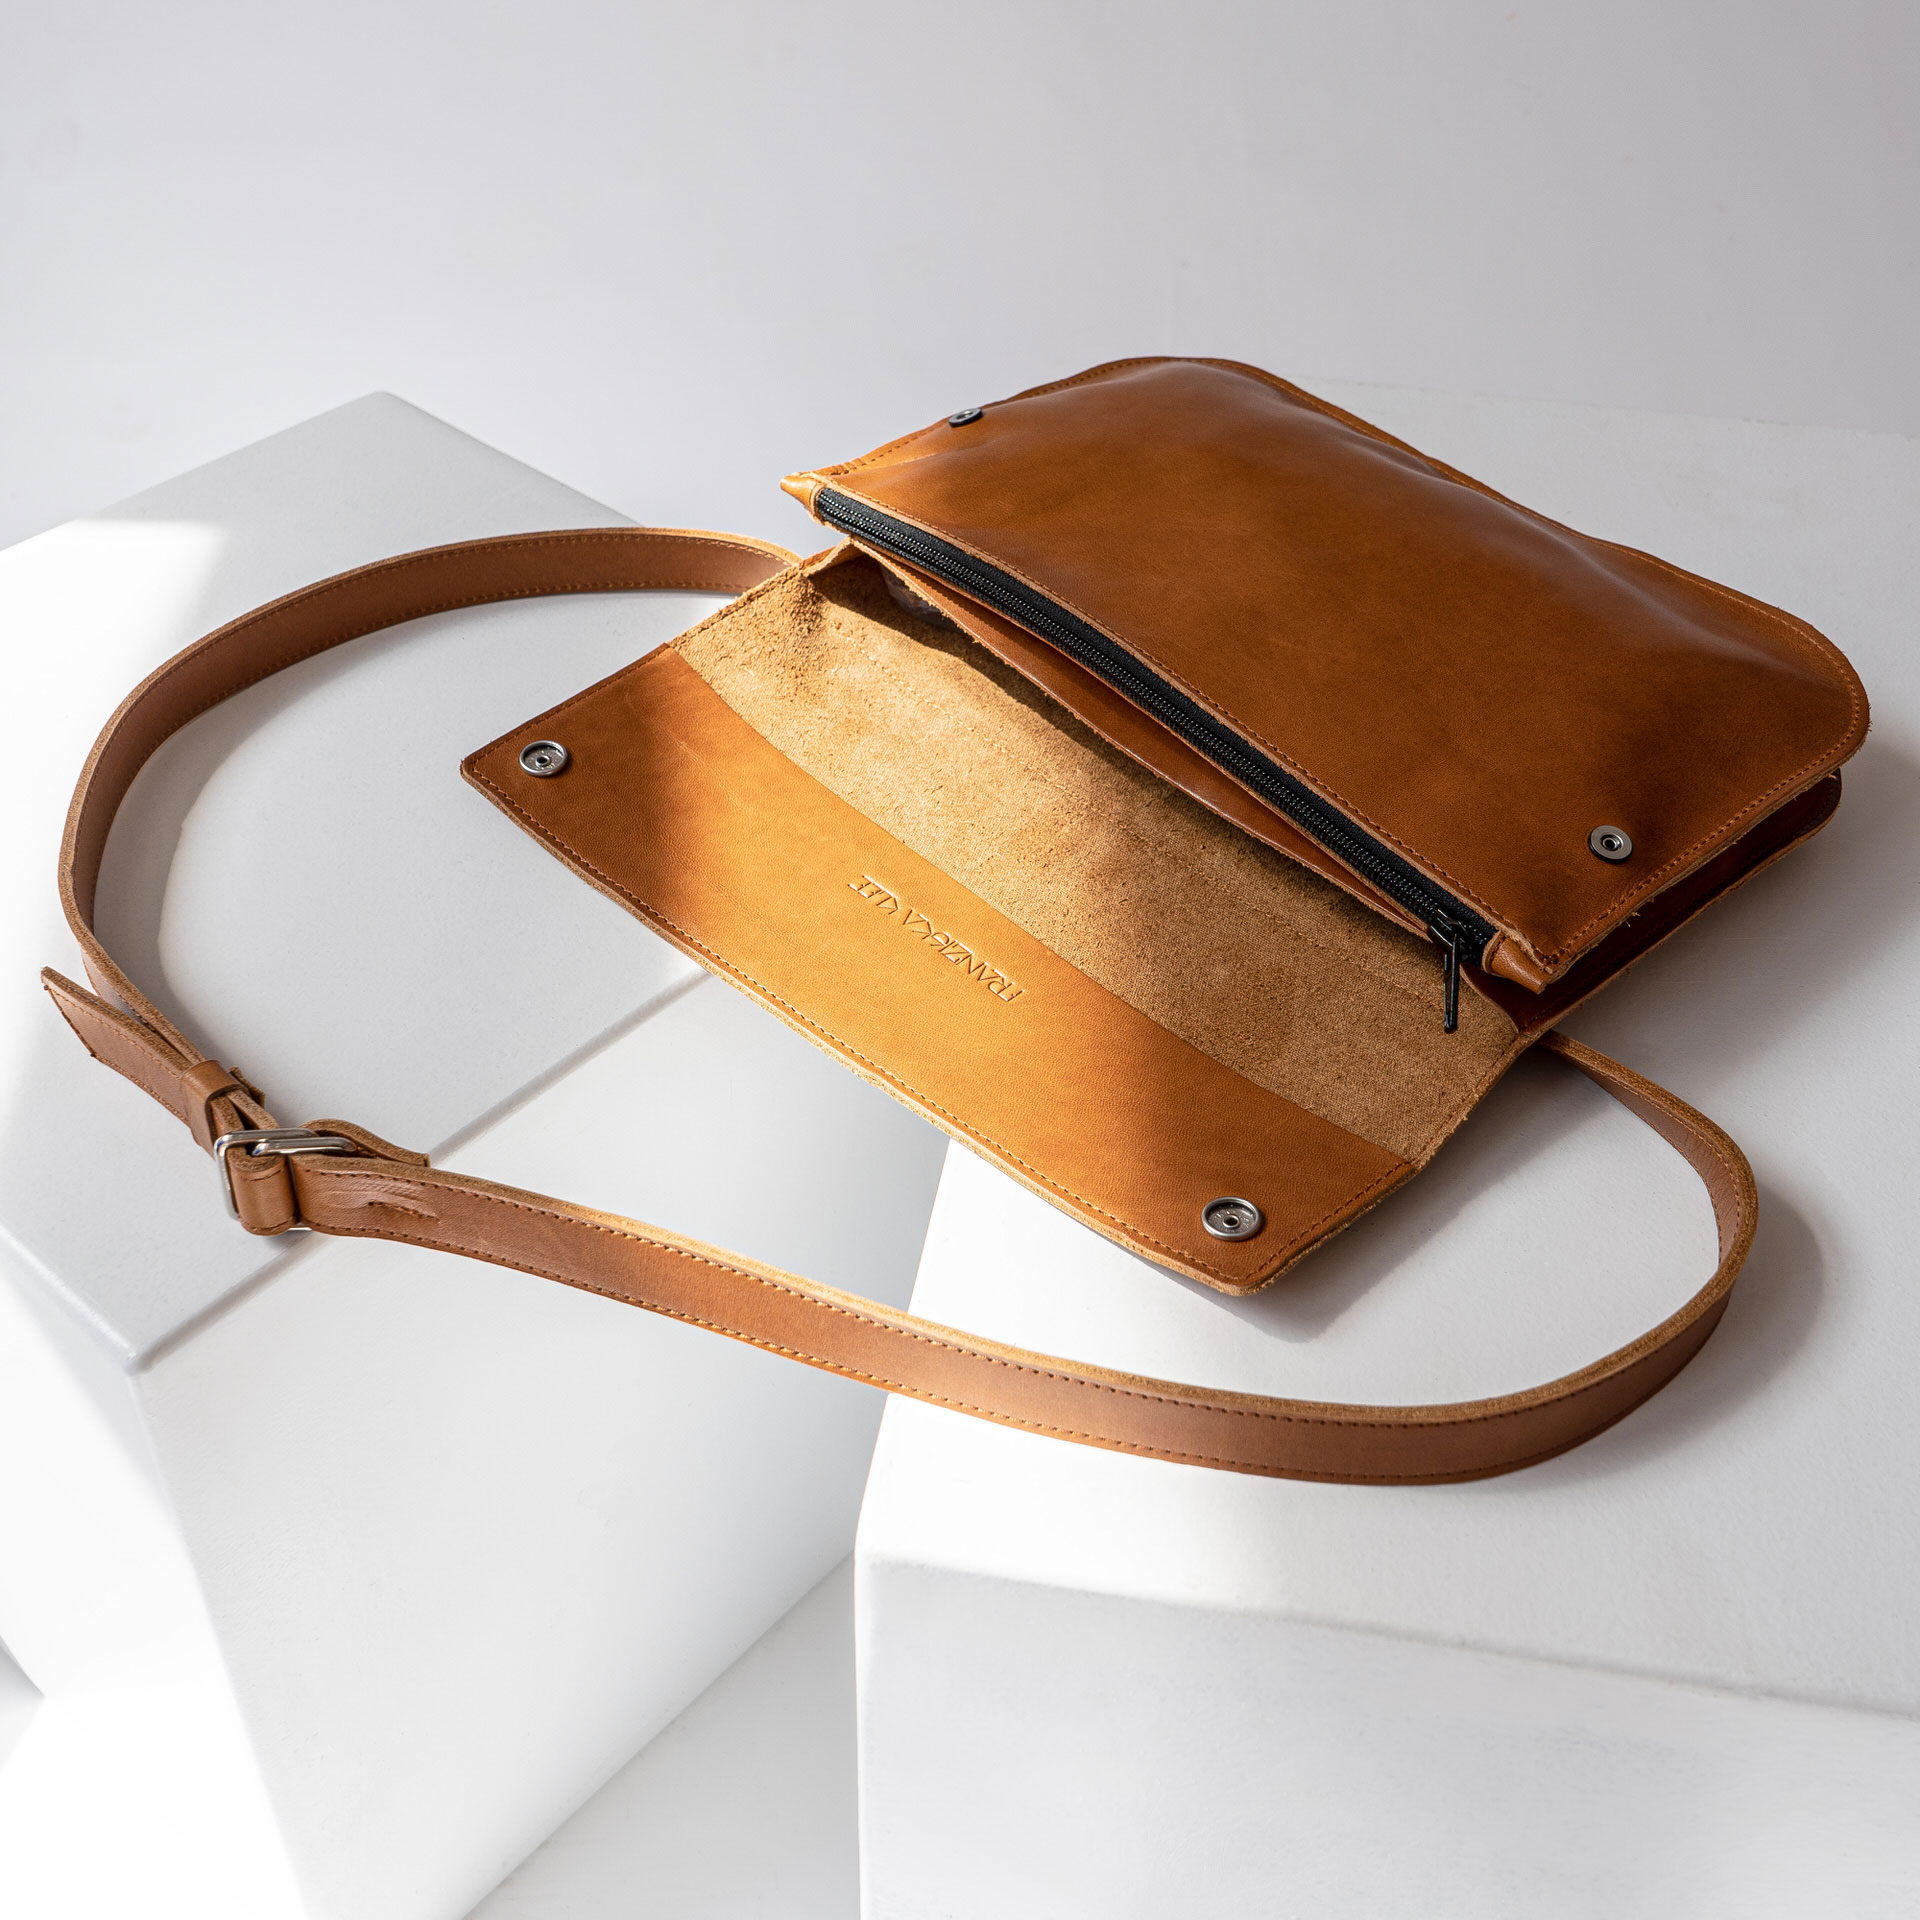 Crossbody Bag Tea Large in cognac oiled made of sustainable leather.